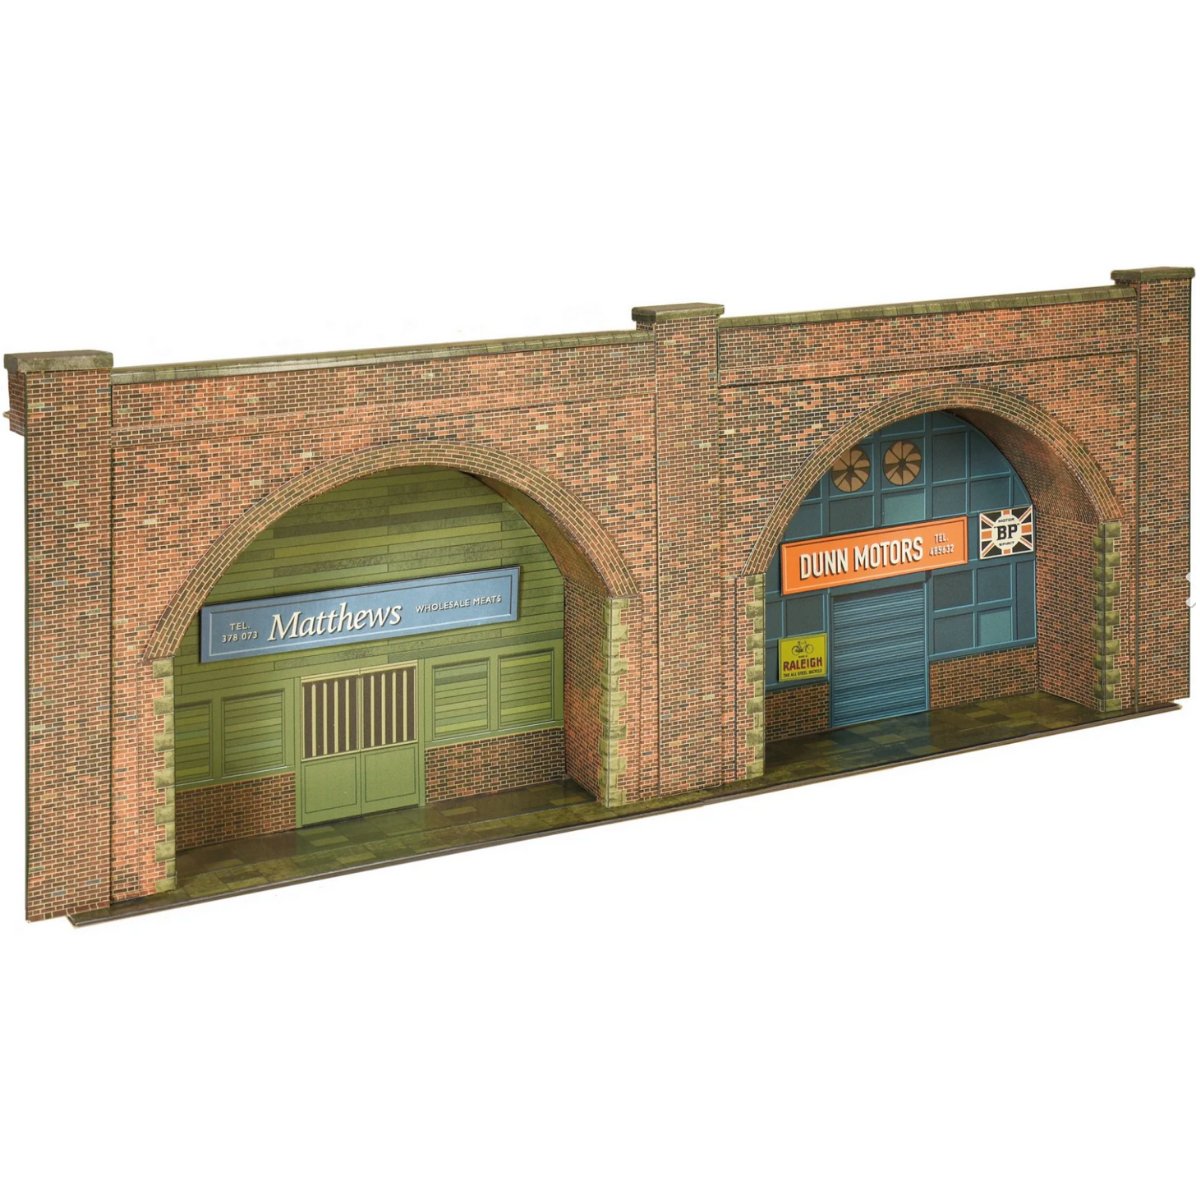 Superquick C08.0 Red Brick Embankment Arches Low Relief - Card Kit - Phillips Hobbies